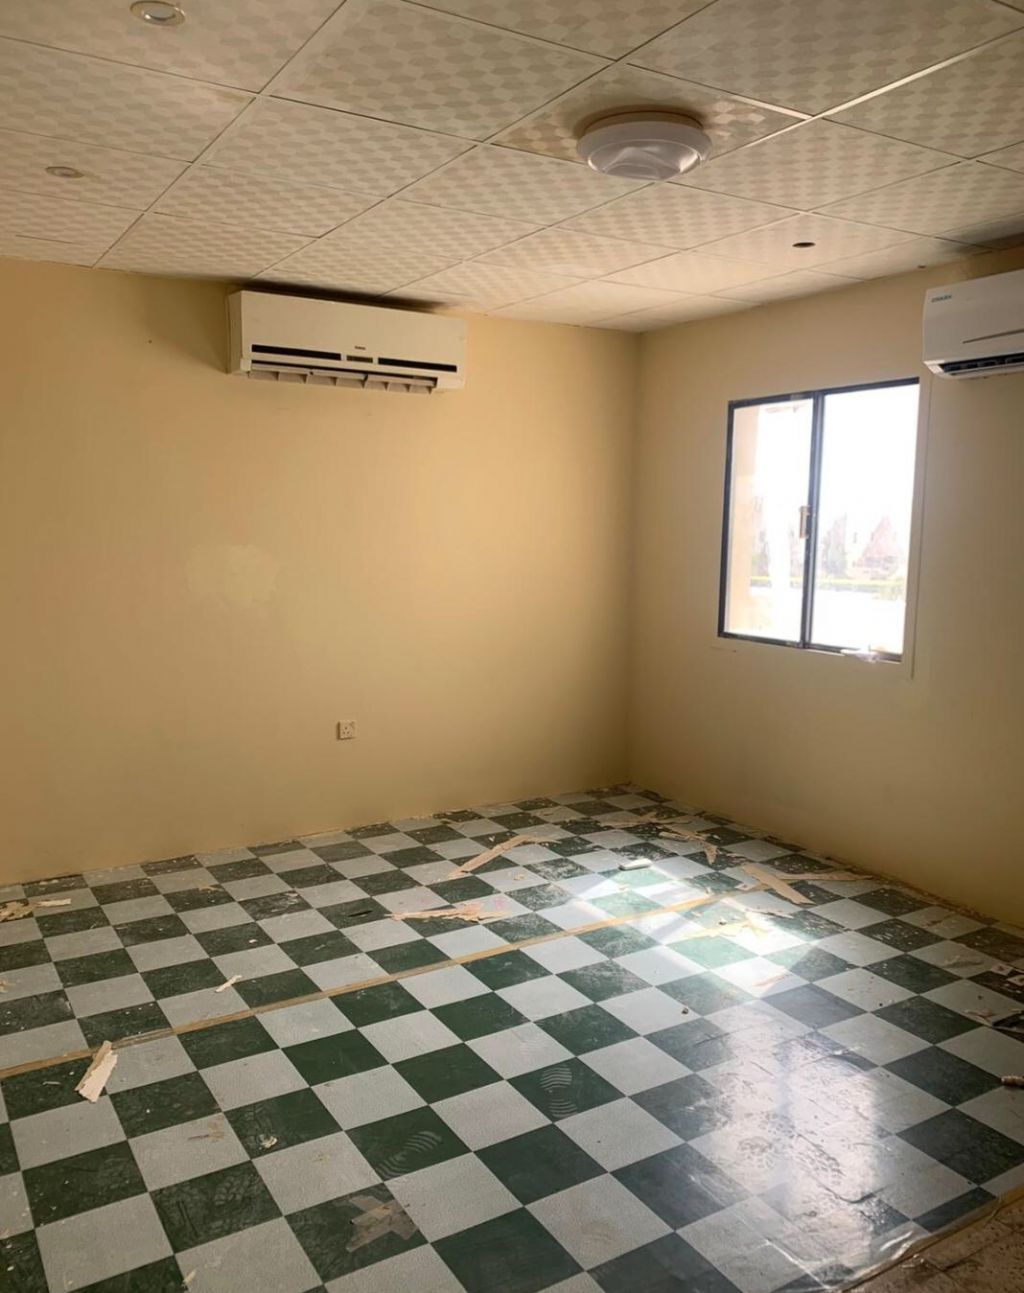 Residential Property 6 Bedrooms S/F Villa in Compound  for rent in Al-Thumama , Doha-Qatar #18458 - 1  image 